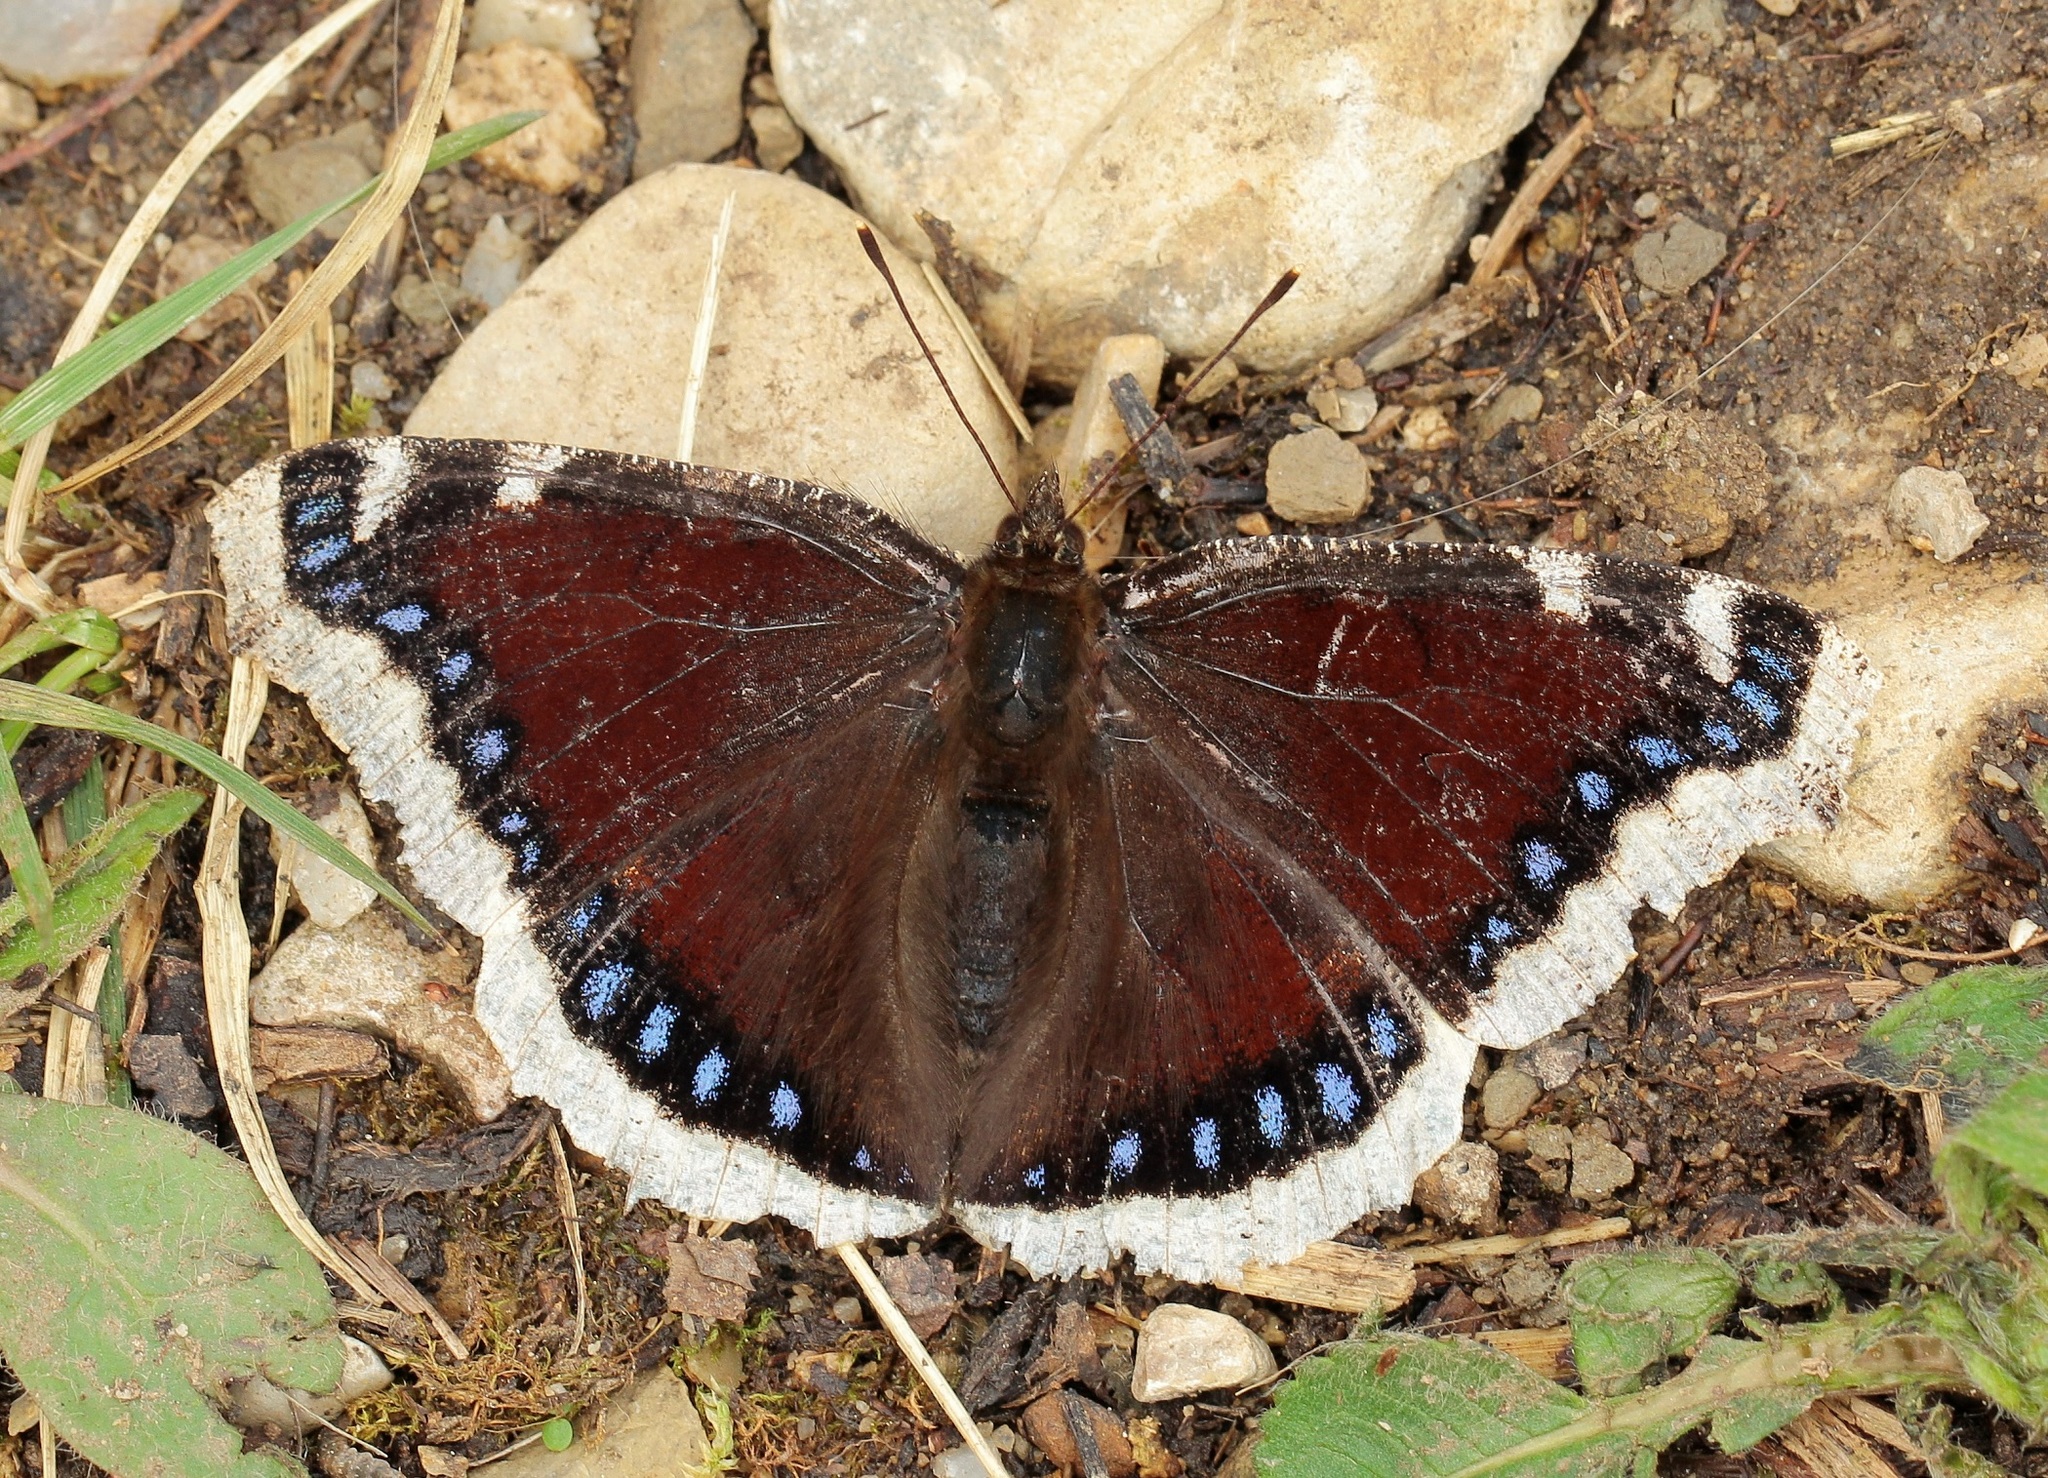 a mourning cloak butterfly with their wings opened, resting on the ground. They are pictured from above